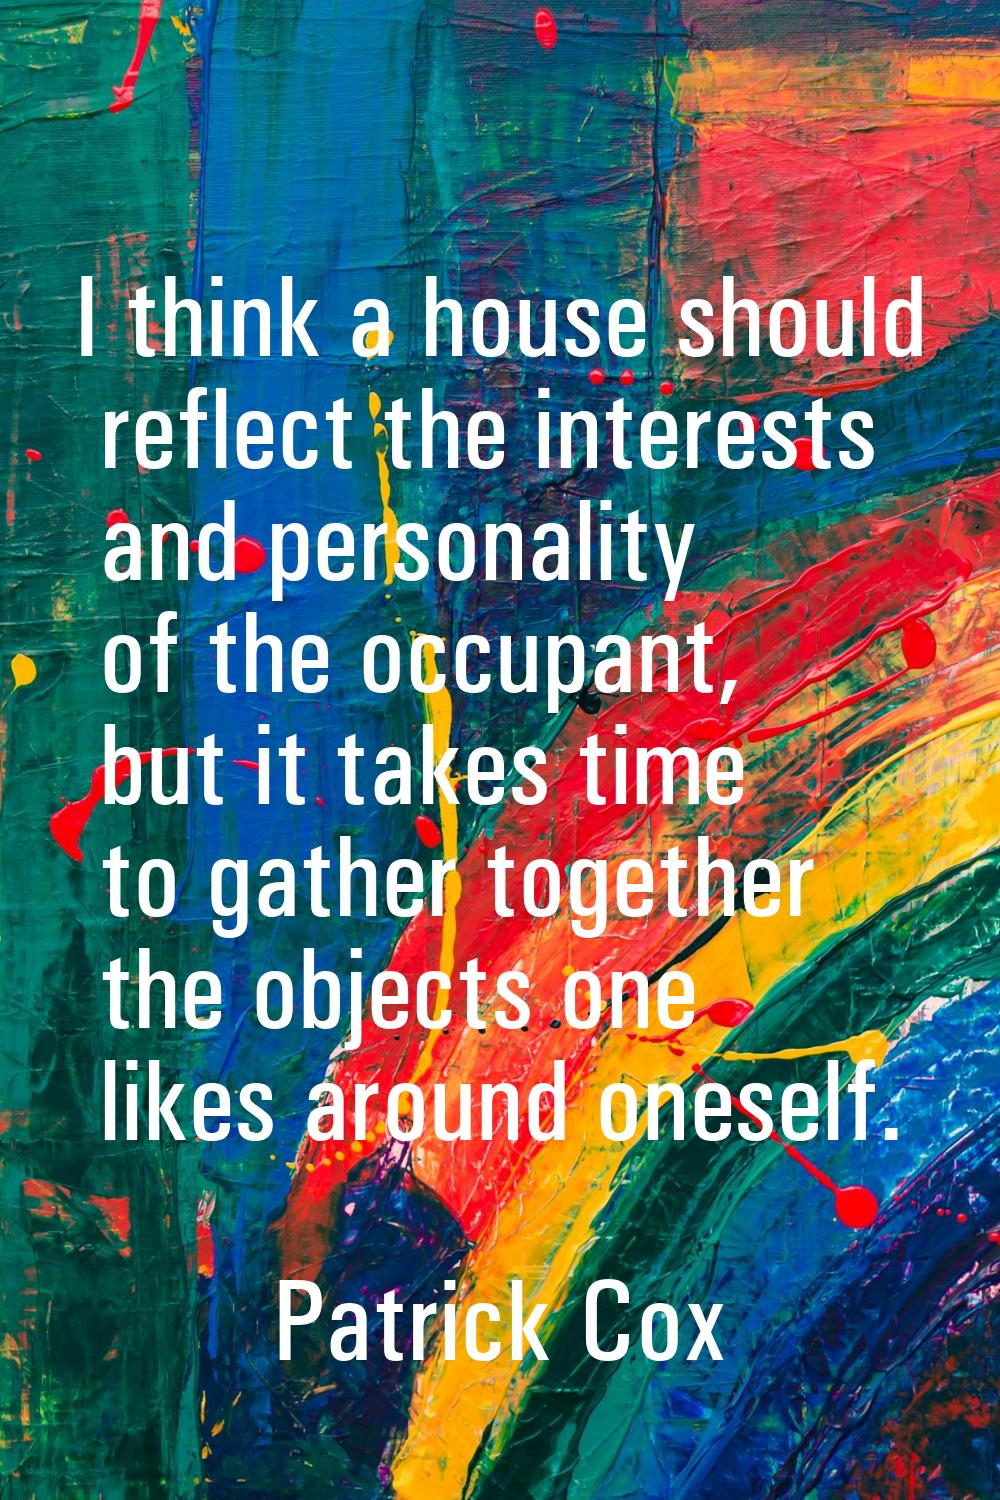 I think a house should reflect the interests and personality of the occupant, but it takes time to 